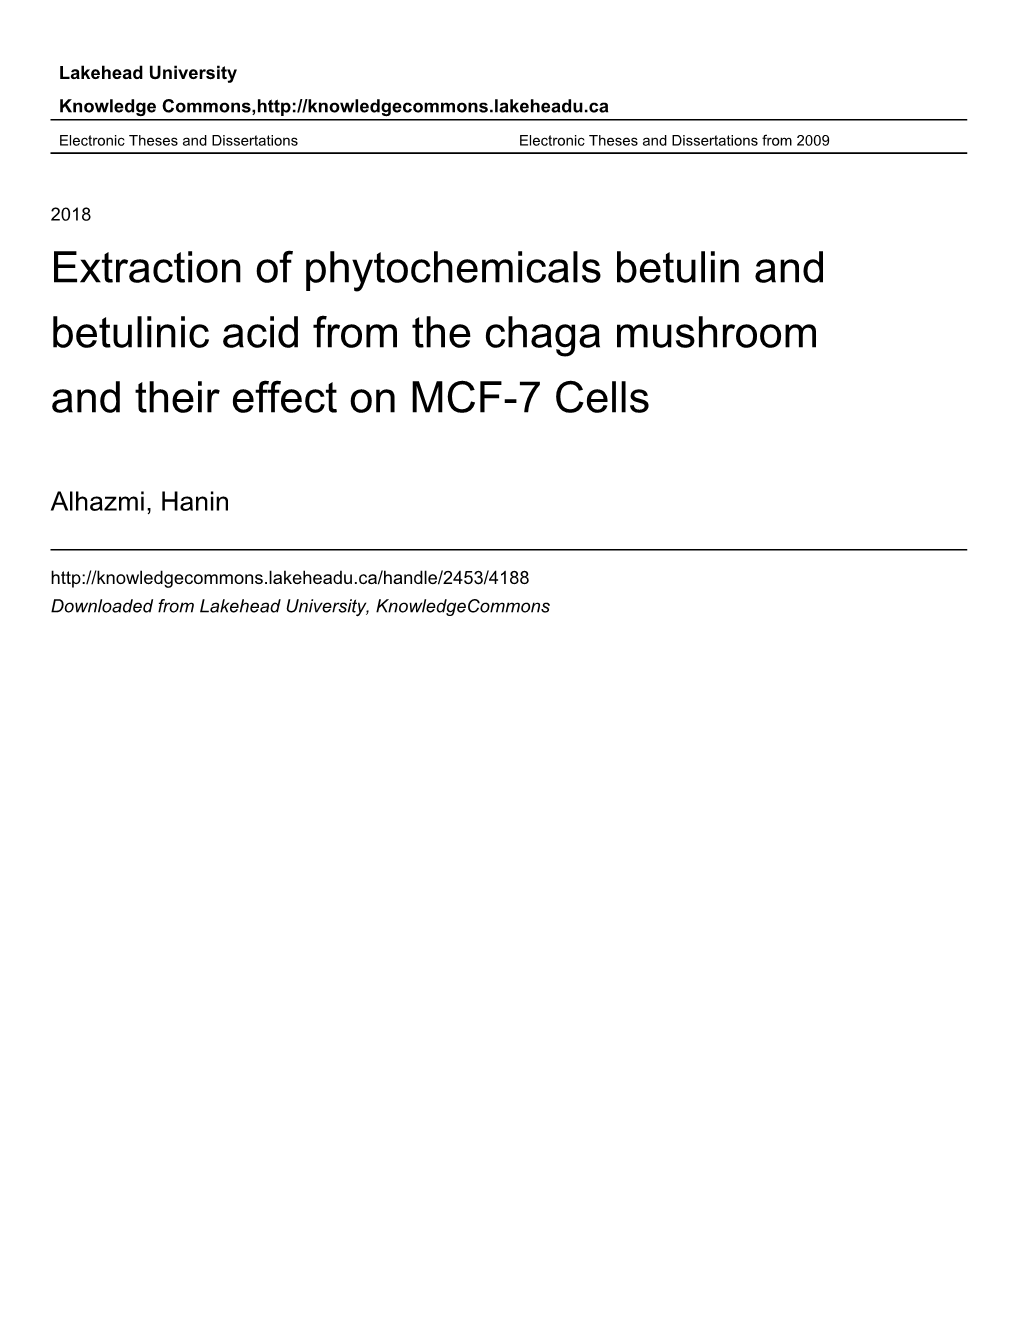 Extraction of Phytochemicals Betulin and Betulinic Acid from the Chaga Mushroom and Their Effect on MCF-7 Cells